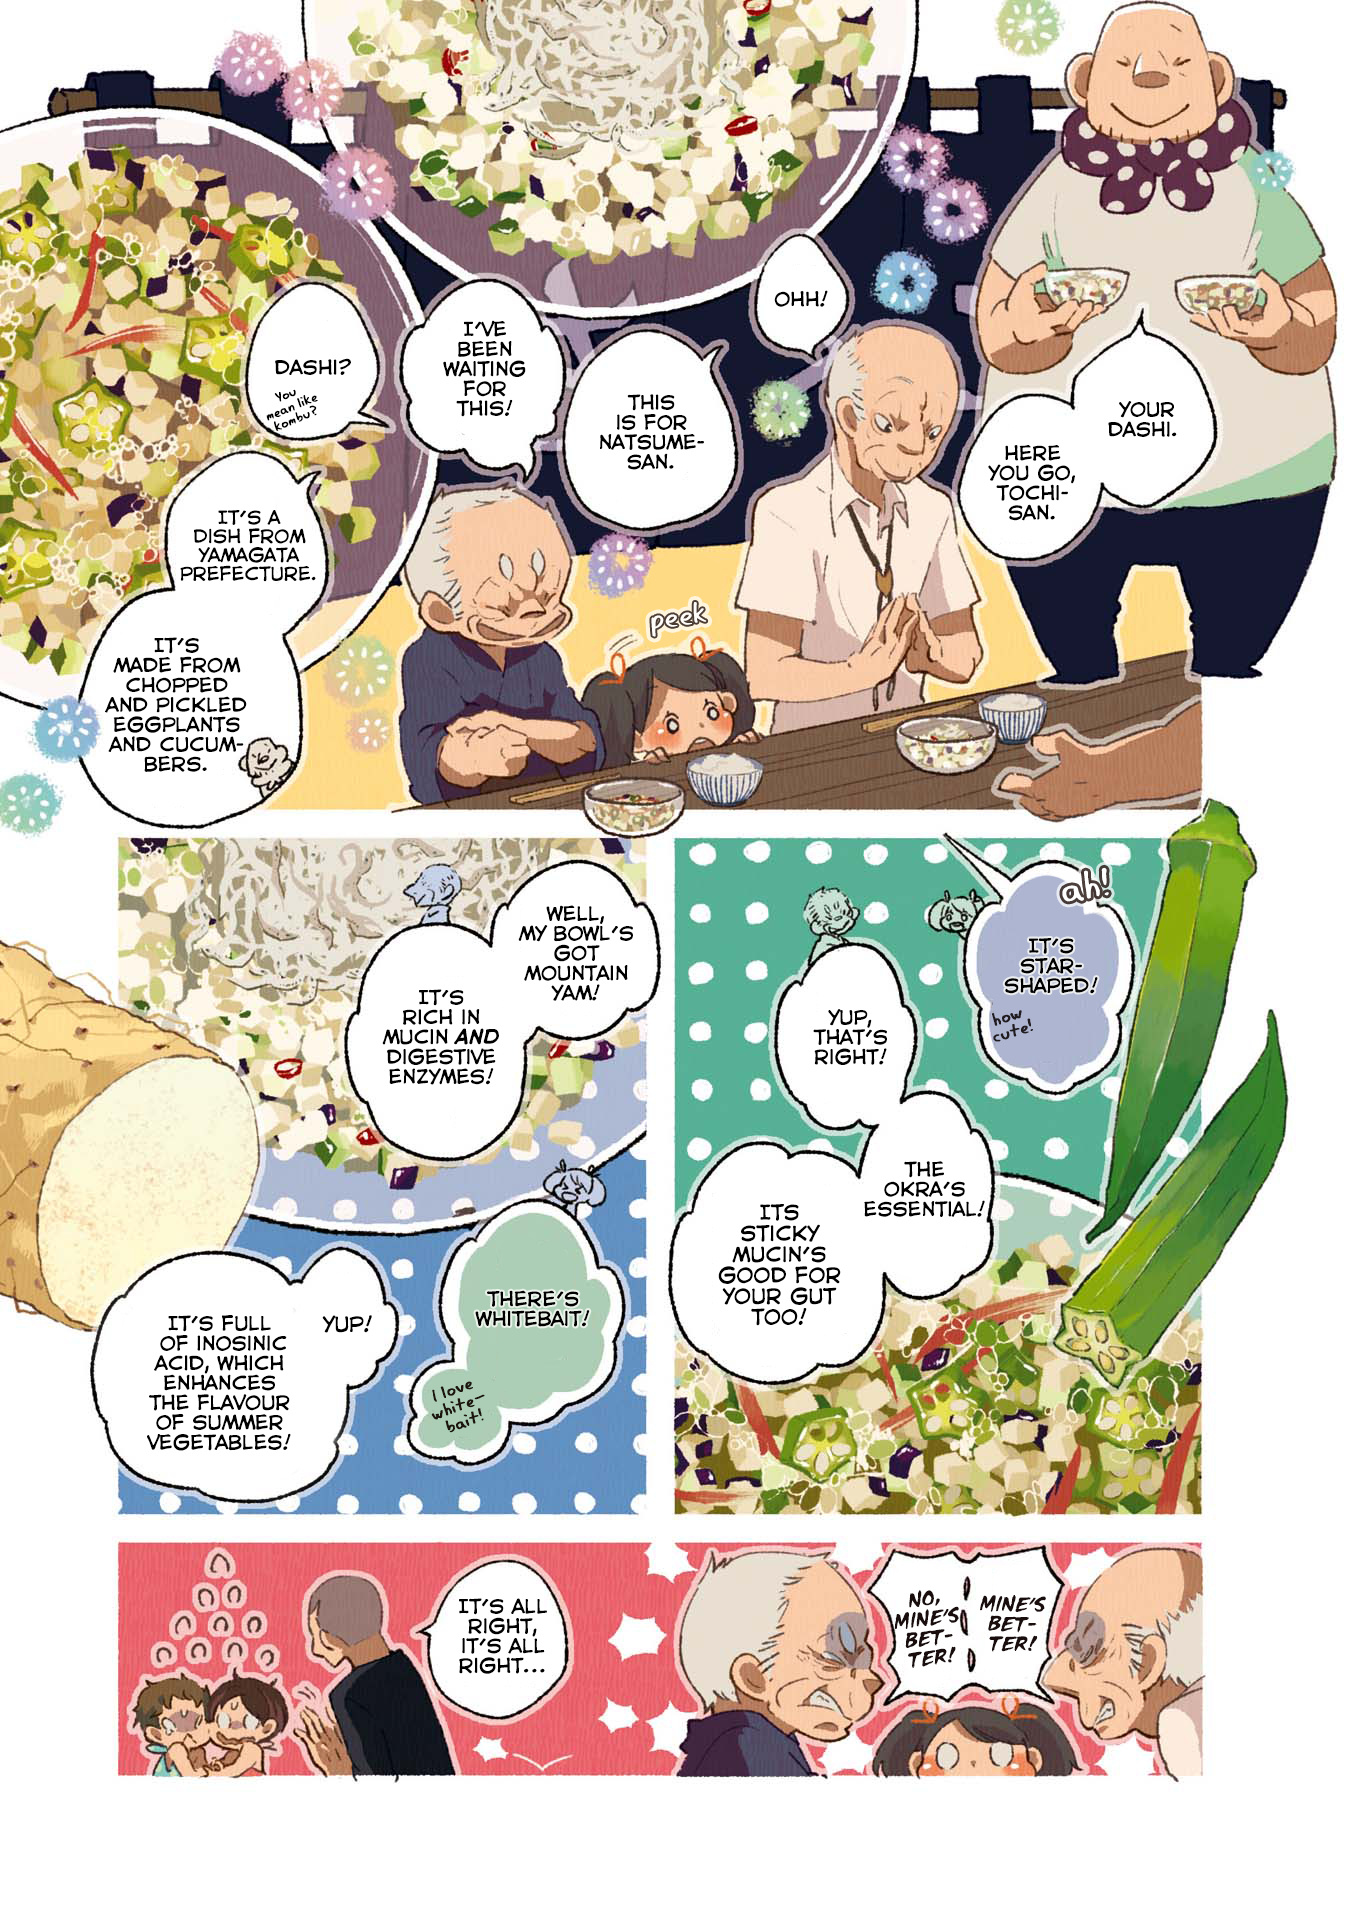 Side Dish Which Matches Rice Well Chapter 13 #9